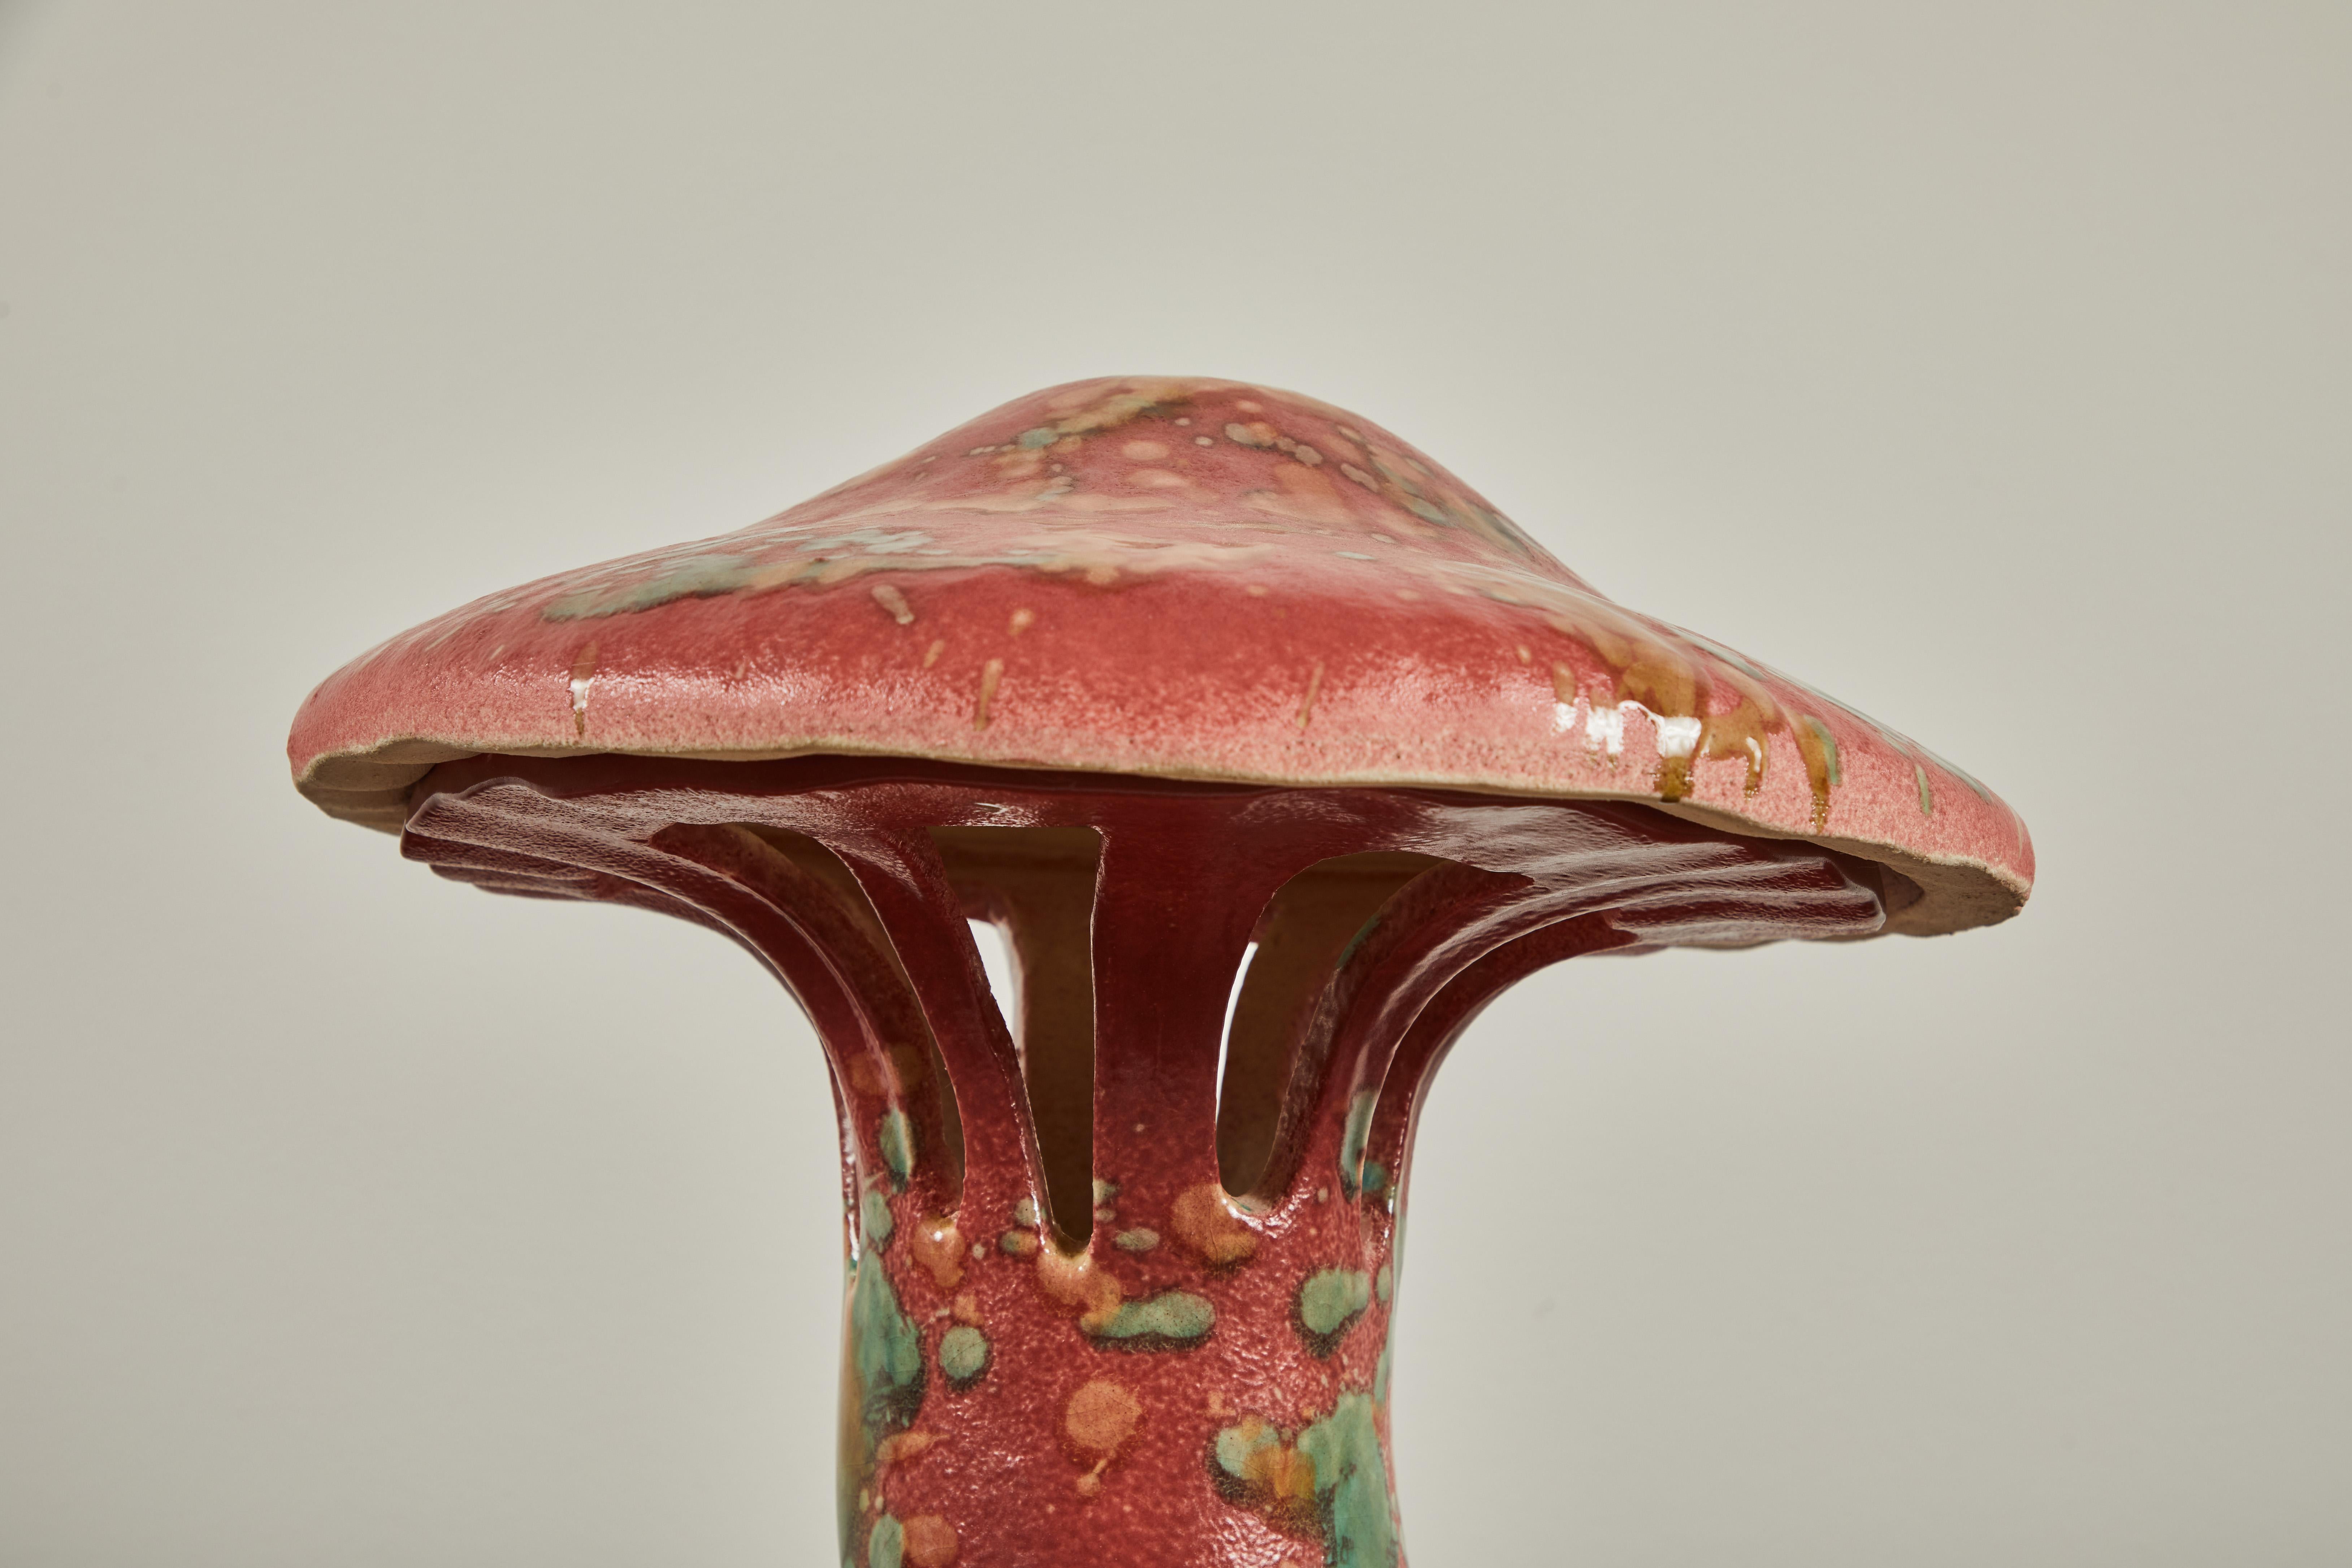 One of a kind and hand made, the ceramic Mushroom table lamp is earthy and unique. The lamp is wired with a red twist cloth cord. The lamp requires one bulb.

